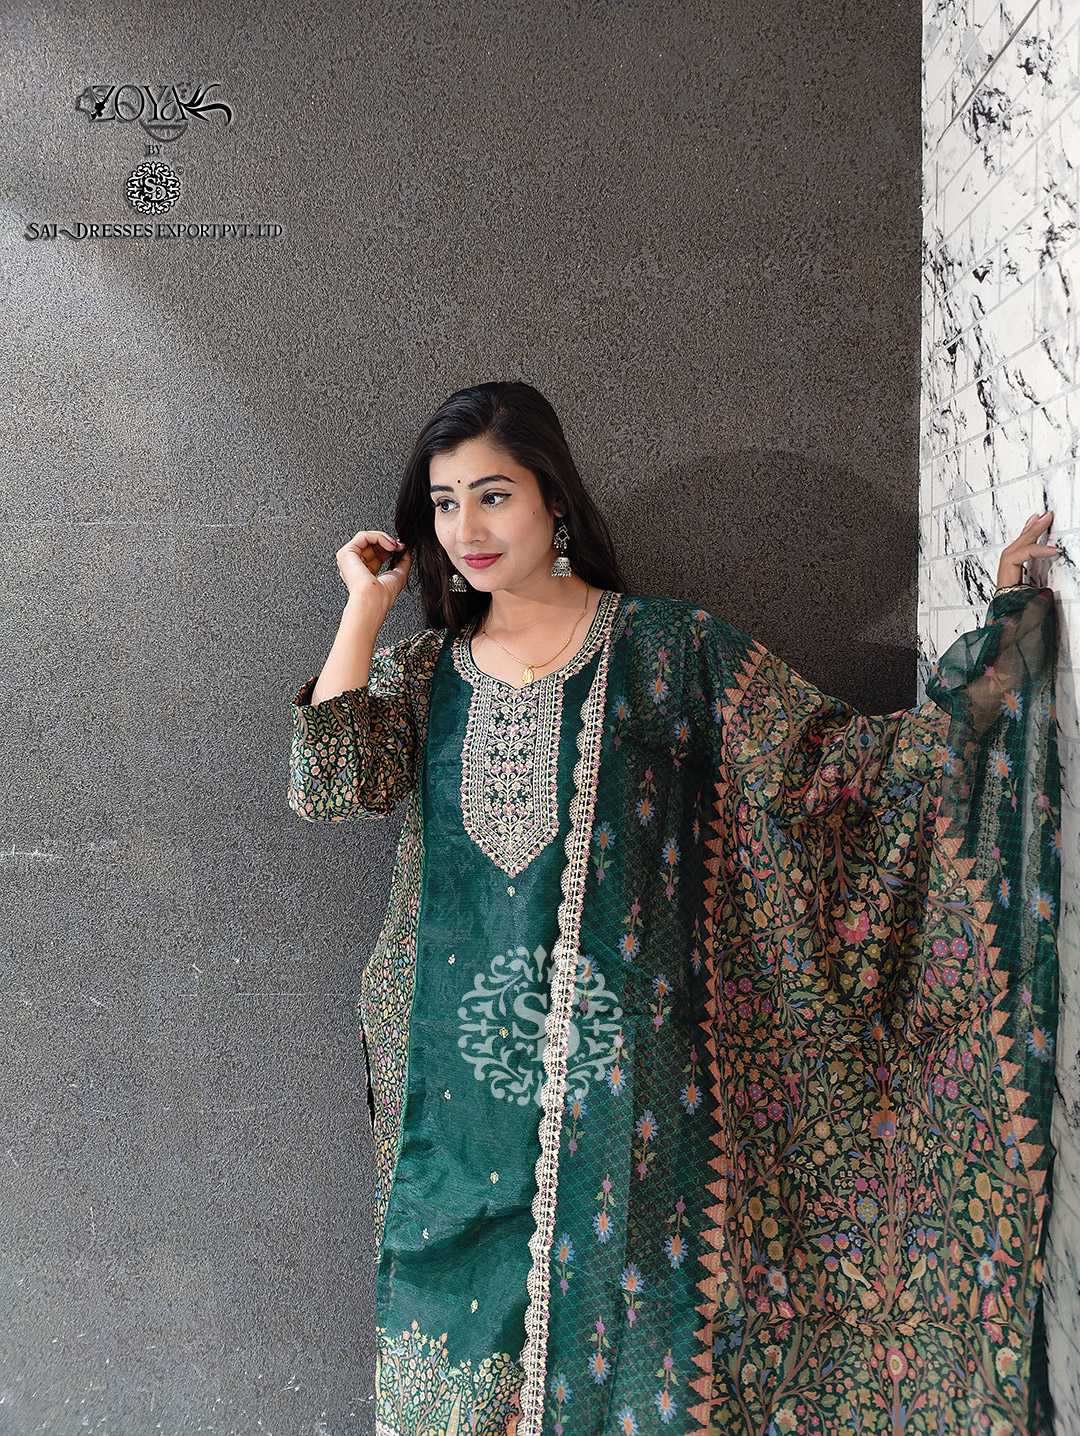 SAI DRESSES PRESENT D.NO SD1048 TO SD1051 READY TO EXCLUSIVE FESTIVE WEAR DESIGNER PAKISTANI 3 PIECE CONCEPT COMBO COLLECTION IN WHOLESALE RATE IN SURAT